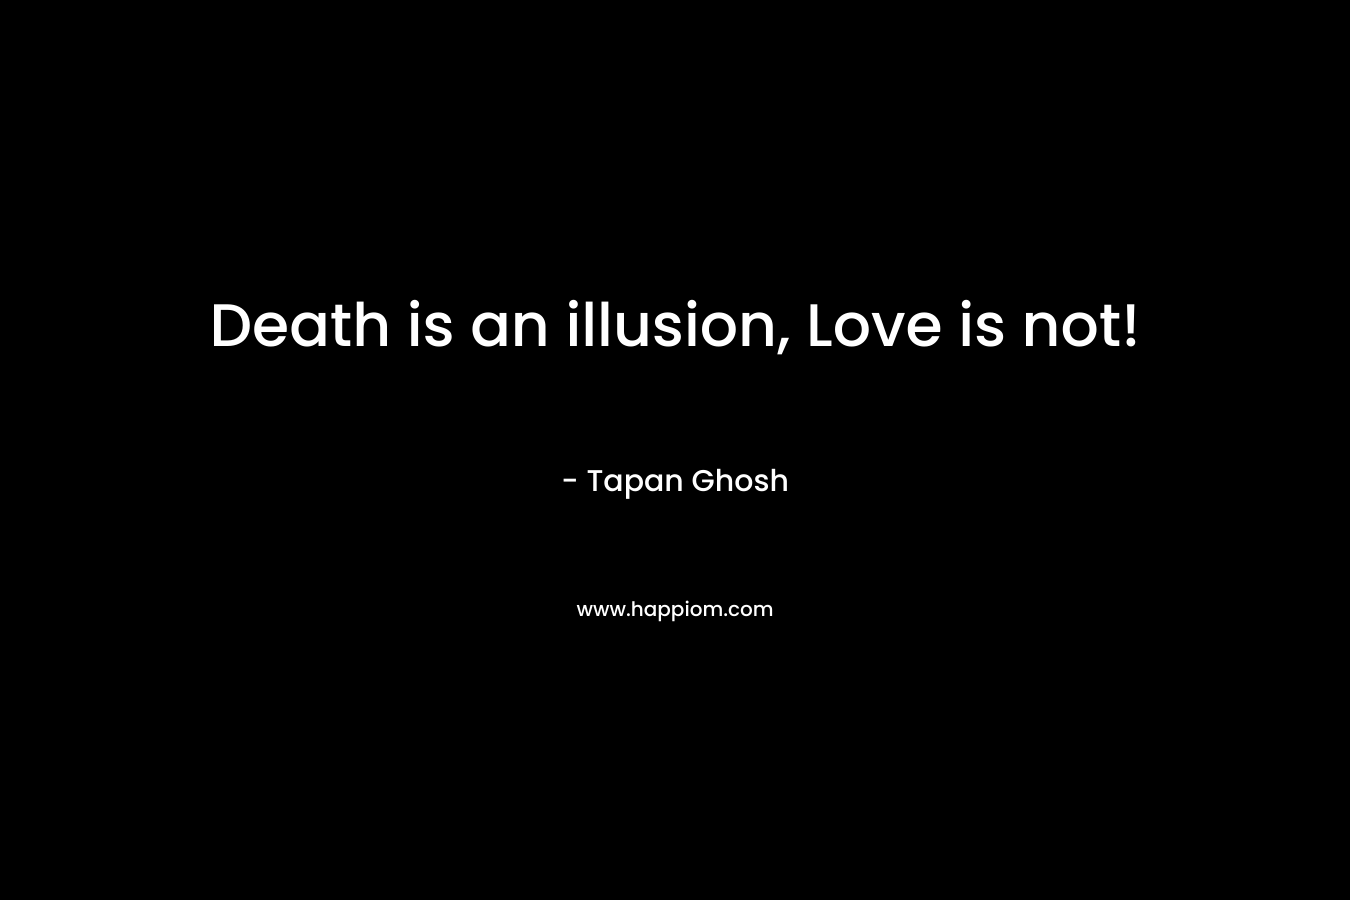 Death is an illusion, Love is not!